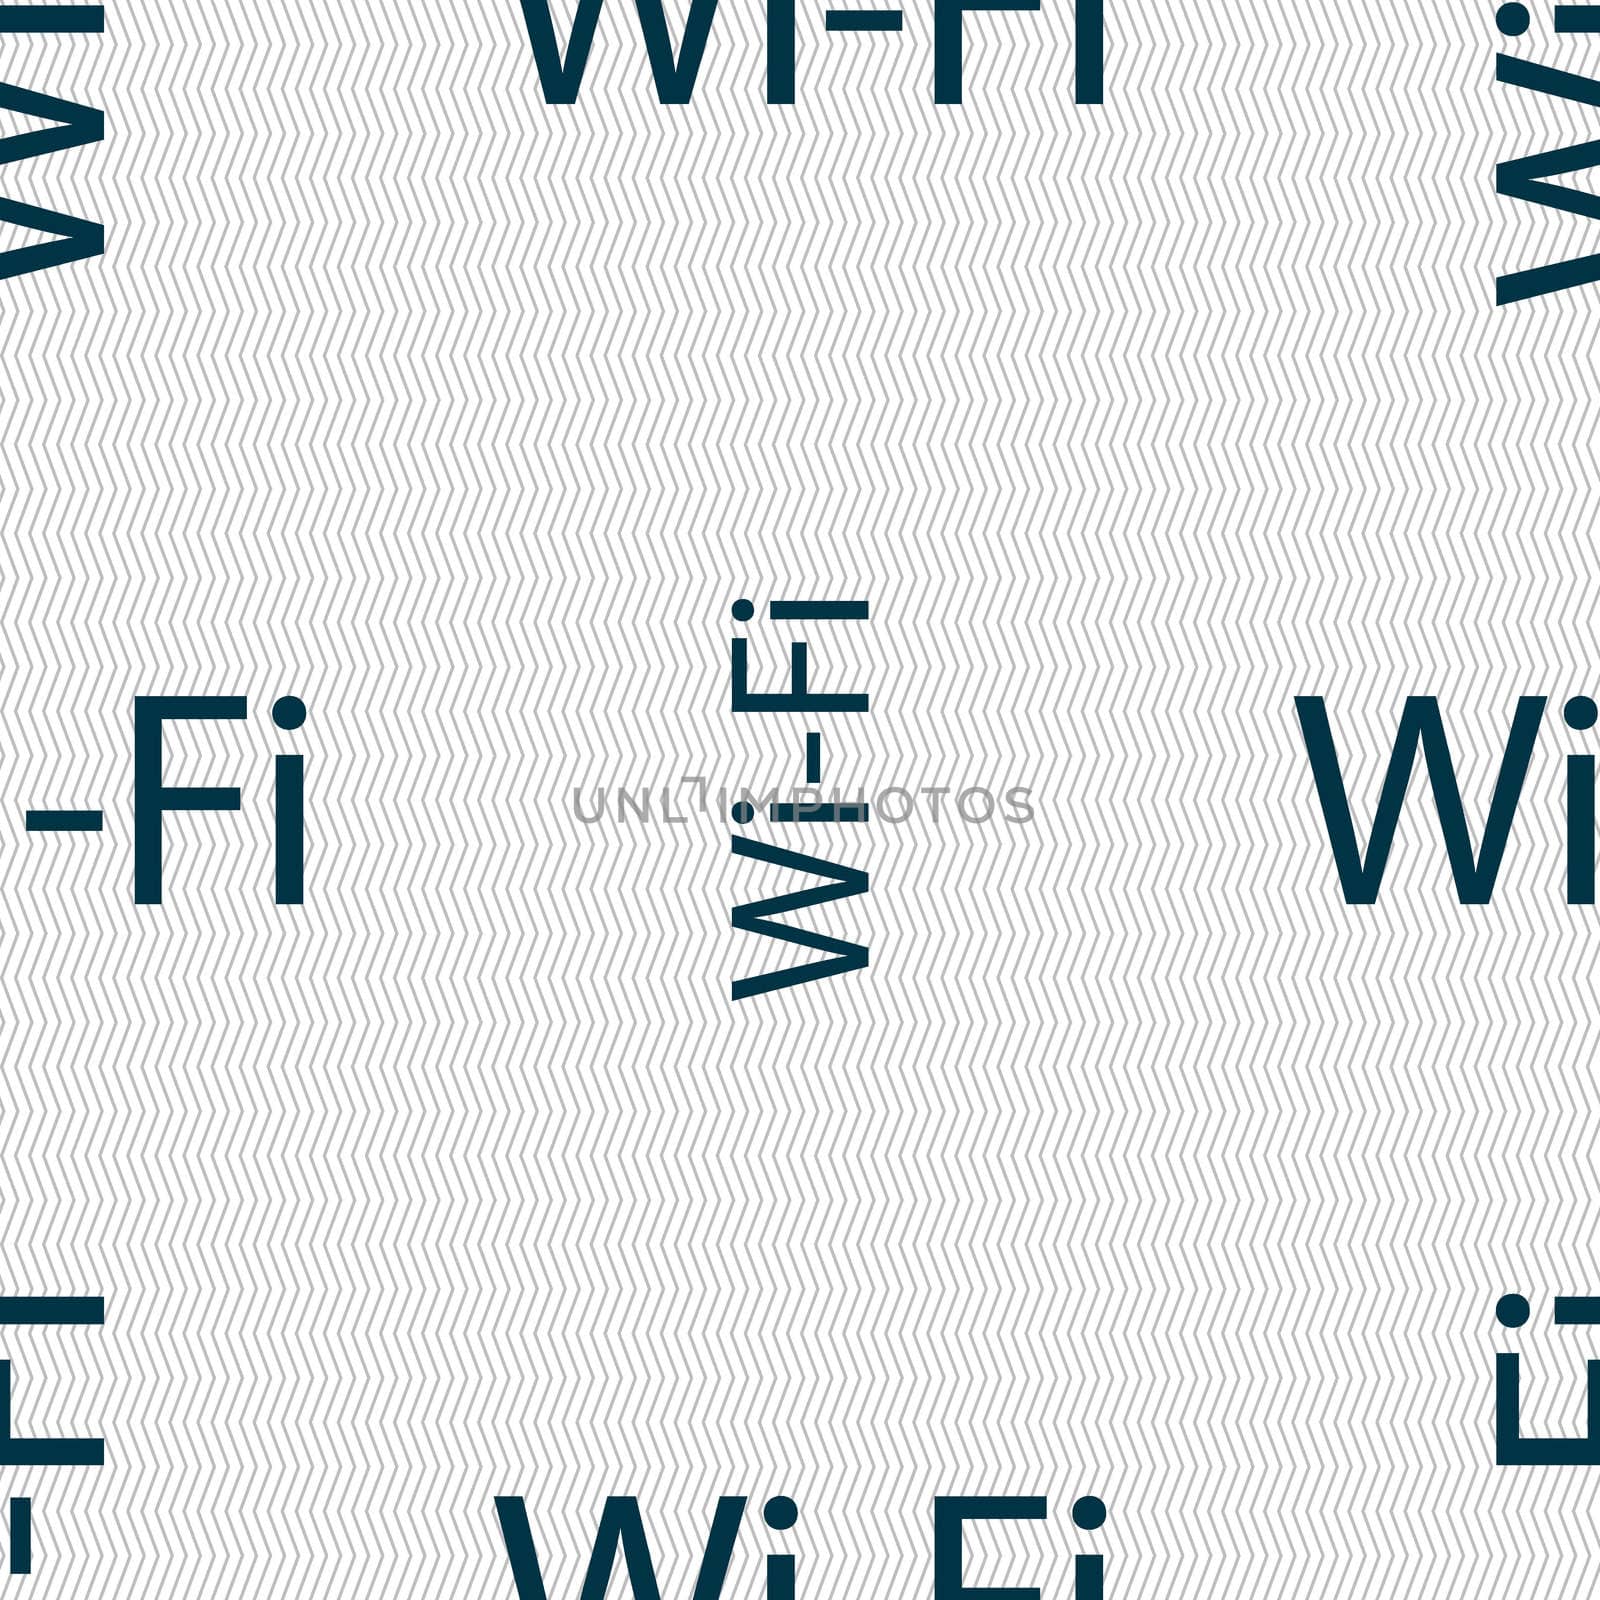 Free wifi sign. Wi-fi symbol. Wireless Network icon. Seamless abstract background with geometric shapes. illustration